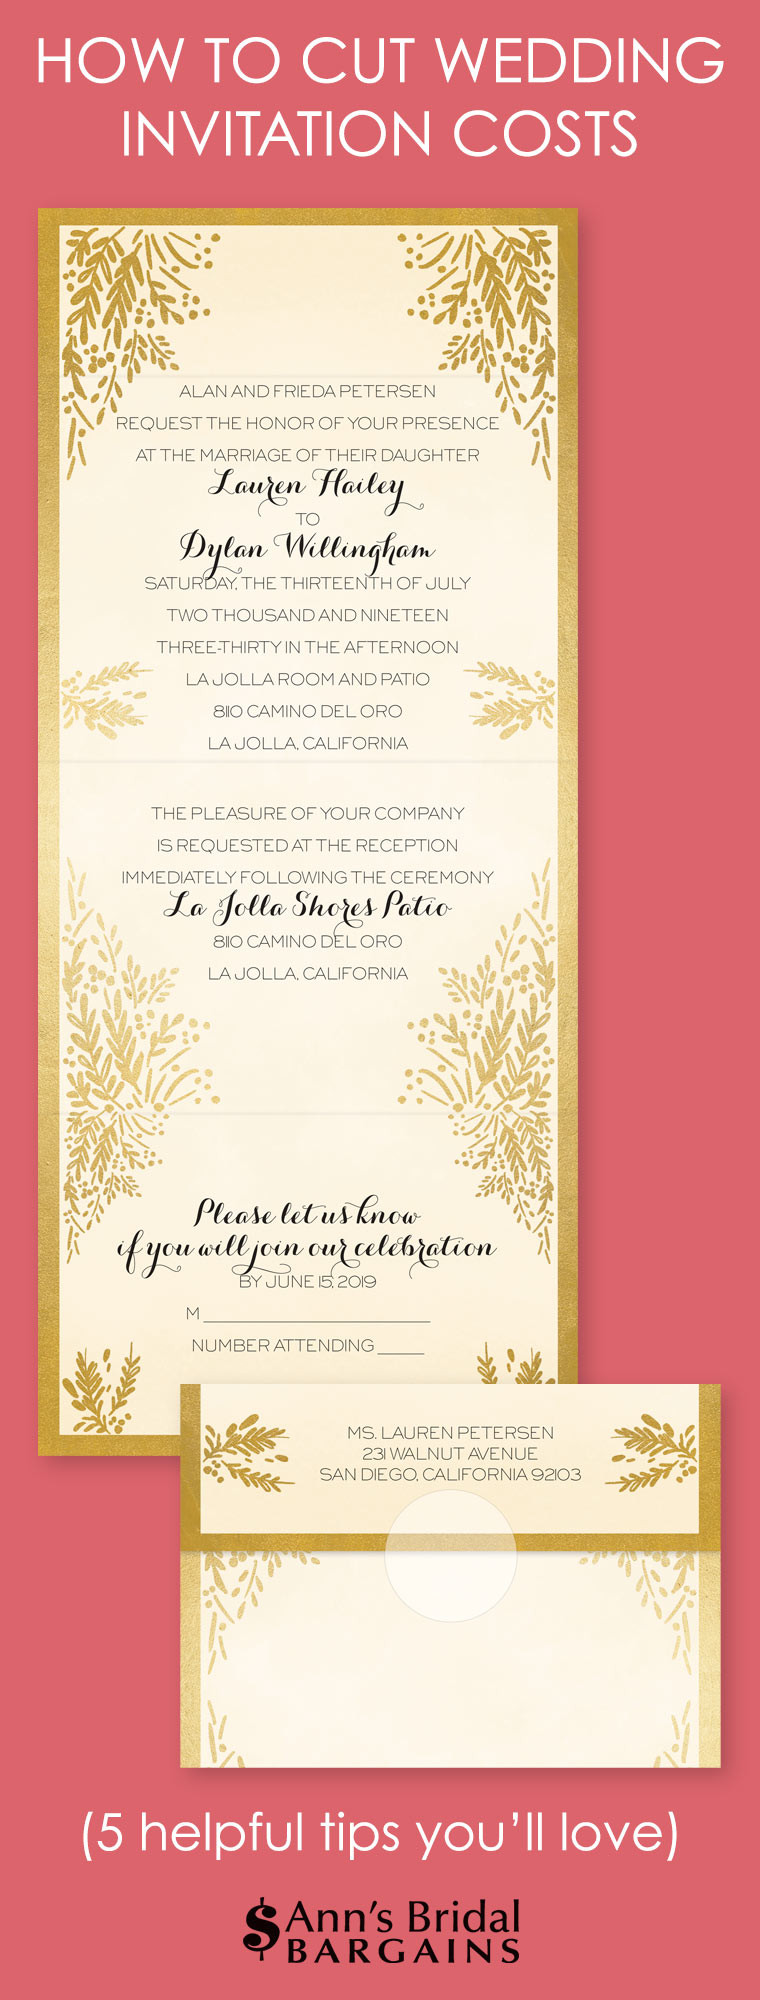 Average Cost For Wedding Invitations
 How to Cut Wedding Invitation Costs